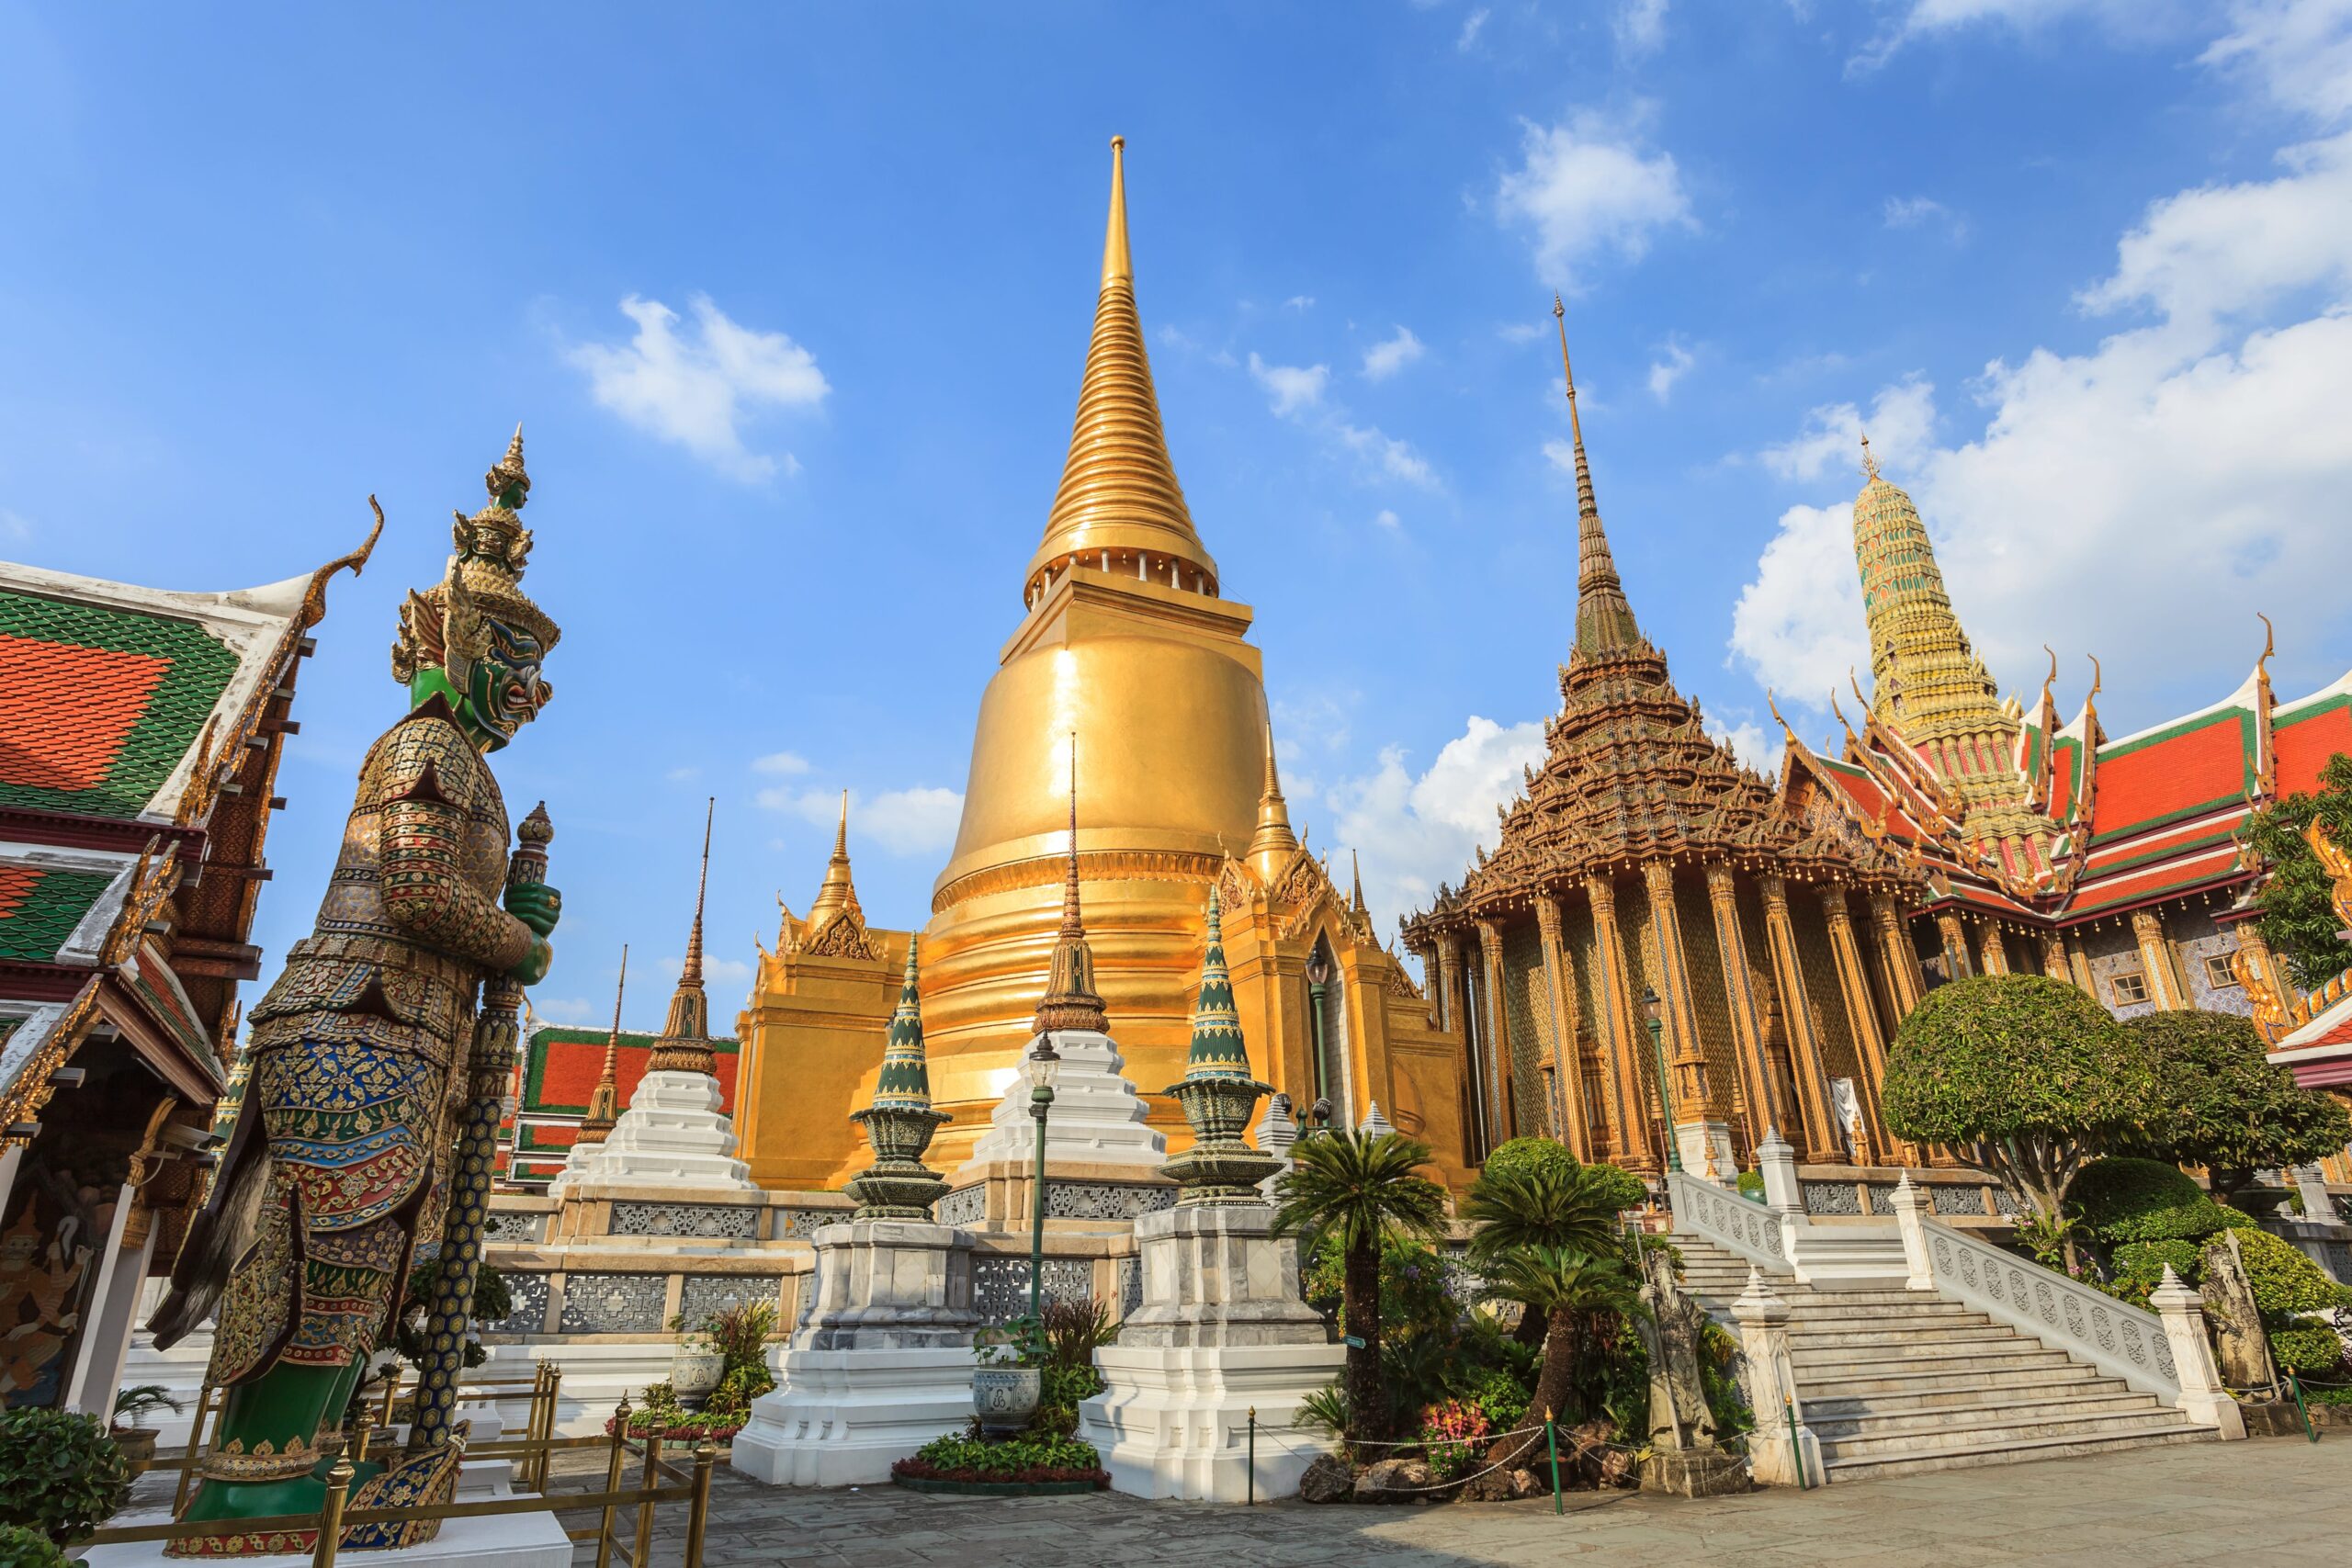 The Best of Thailand: A Guide to the Most Popular Destinations